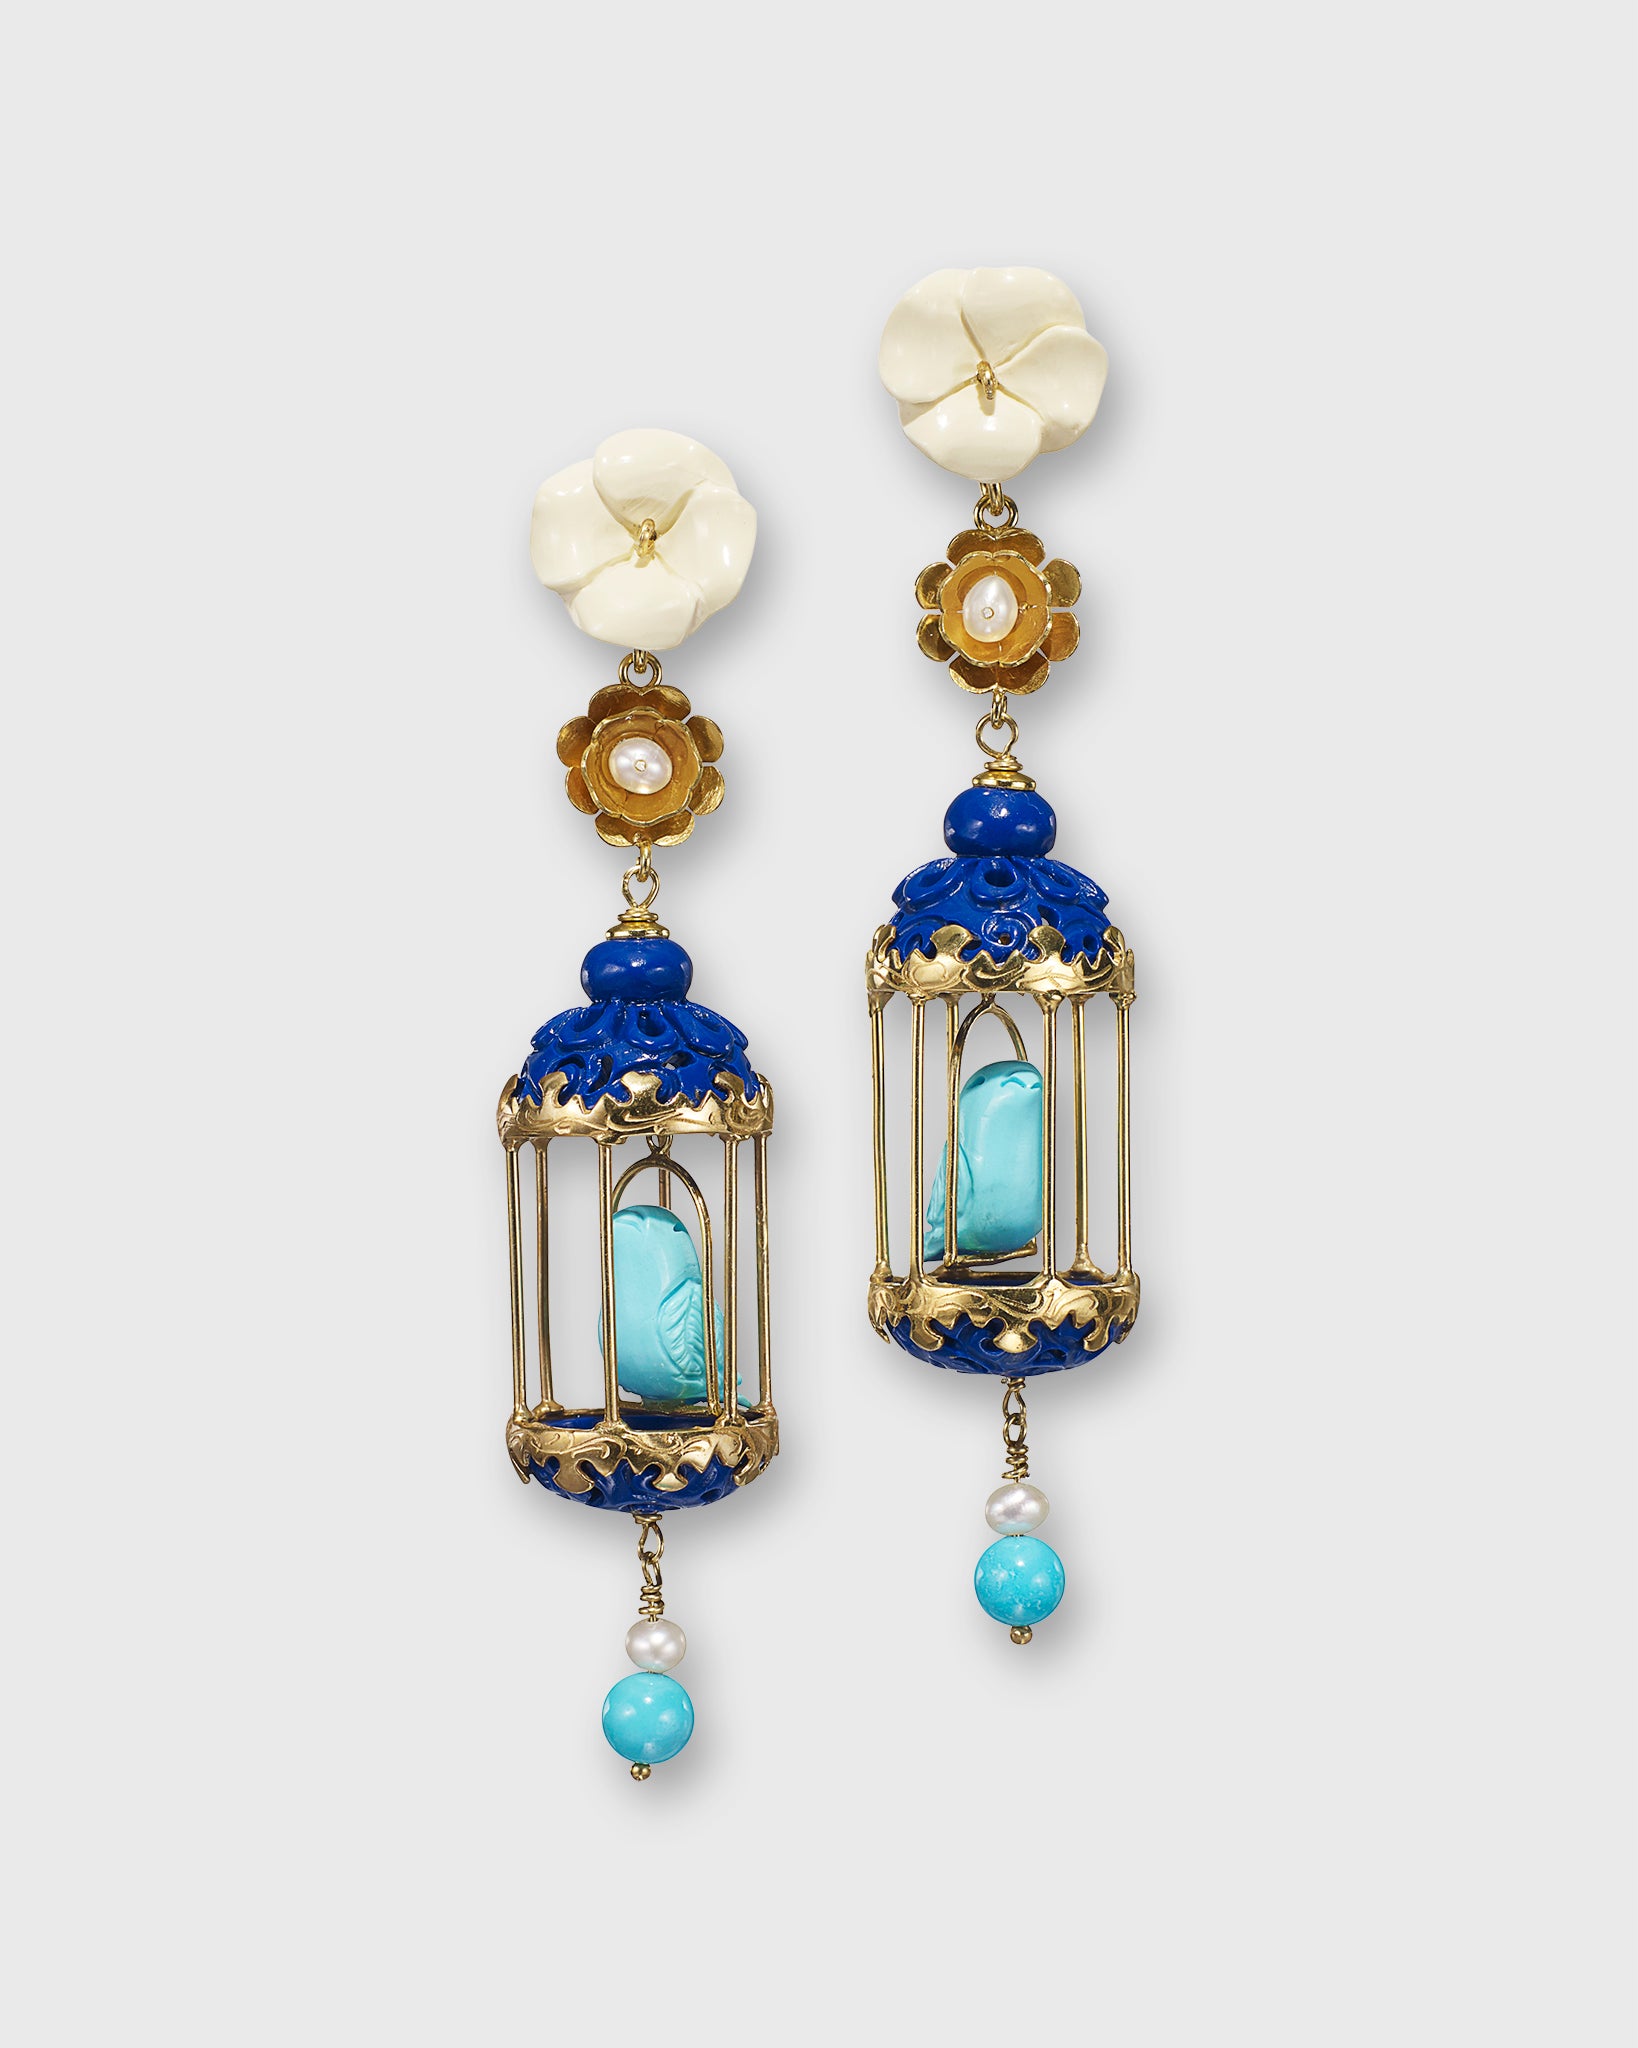 Aviary Classic Earrings in Gold/White/Lapis/Turquoise